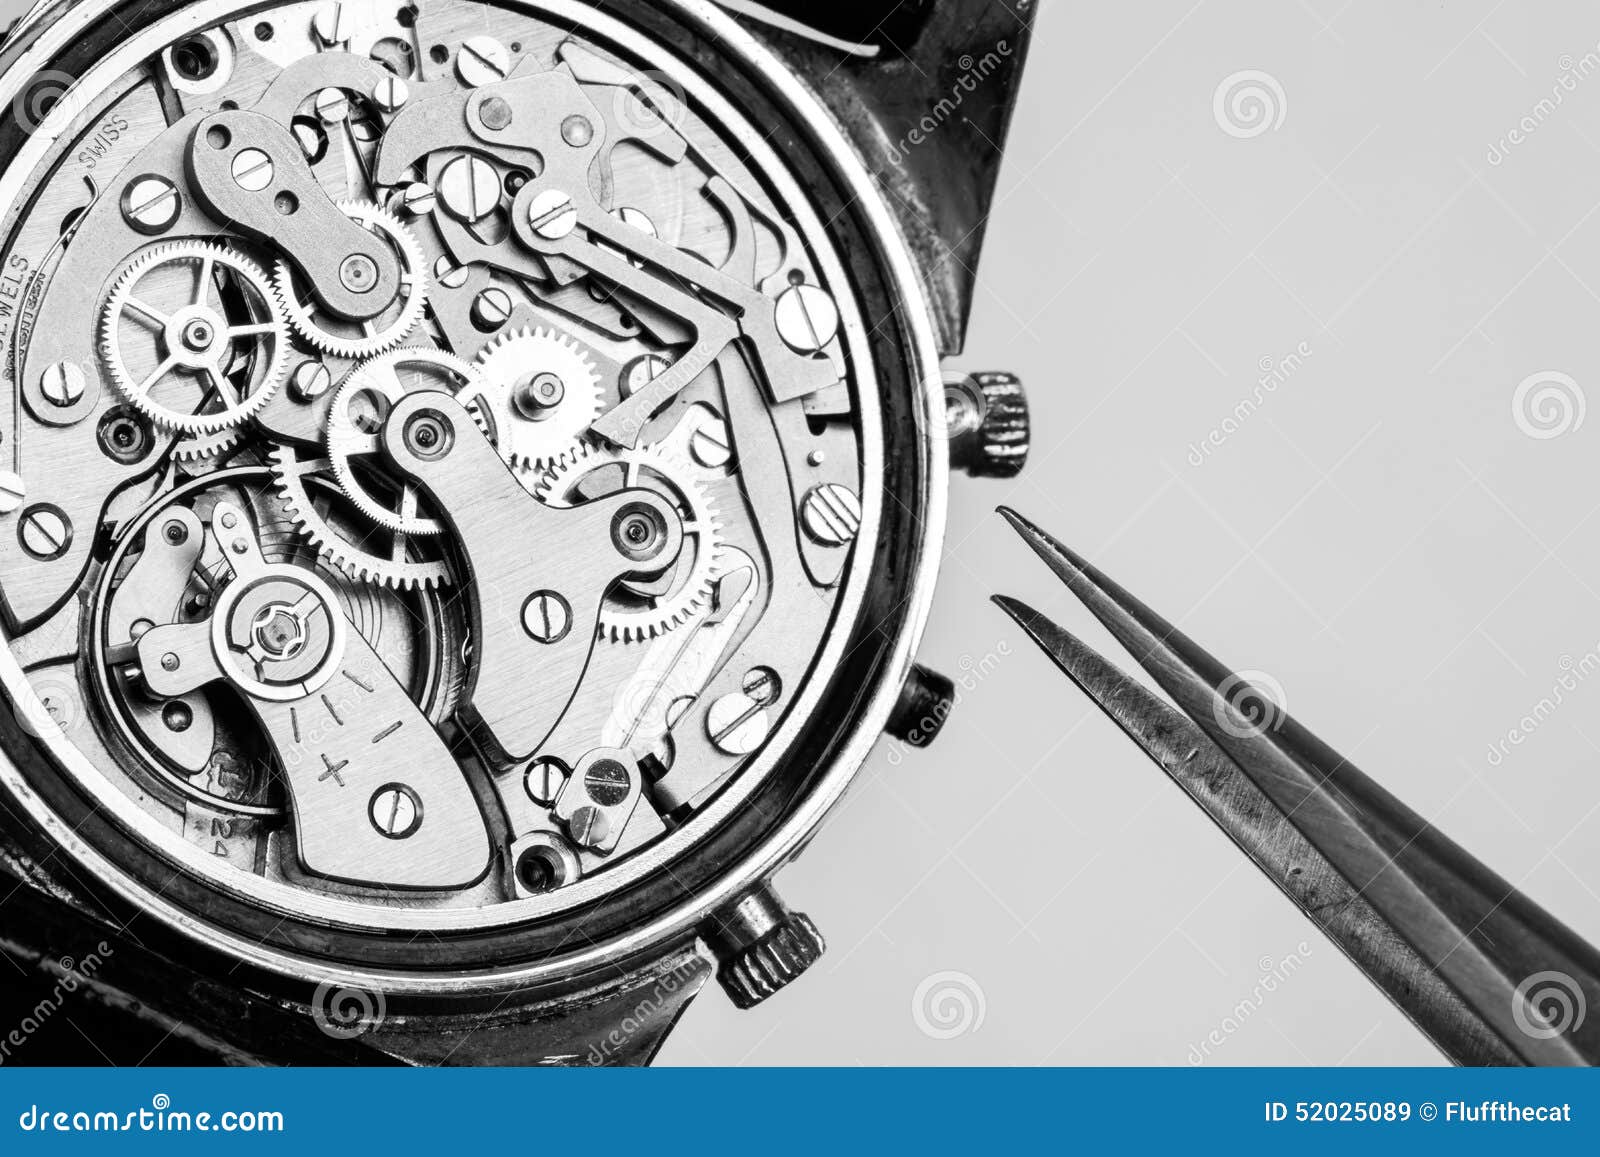 complex watch movement for repair